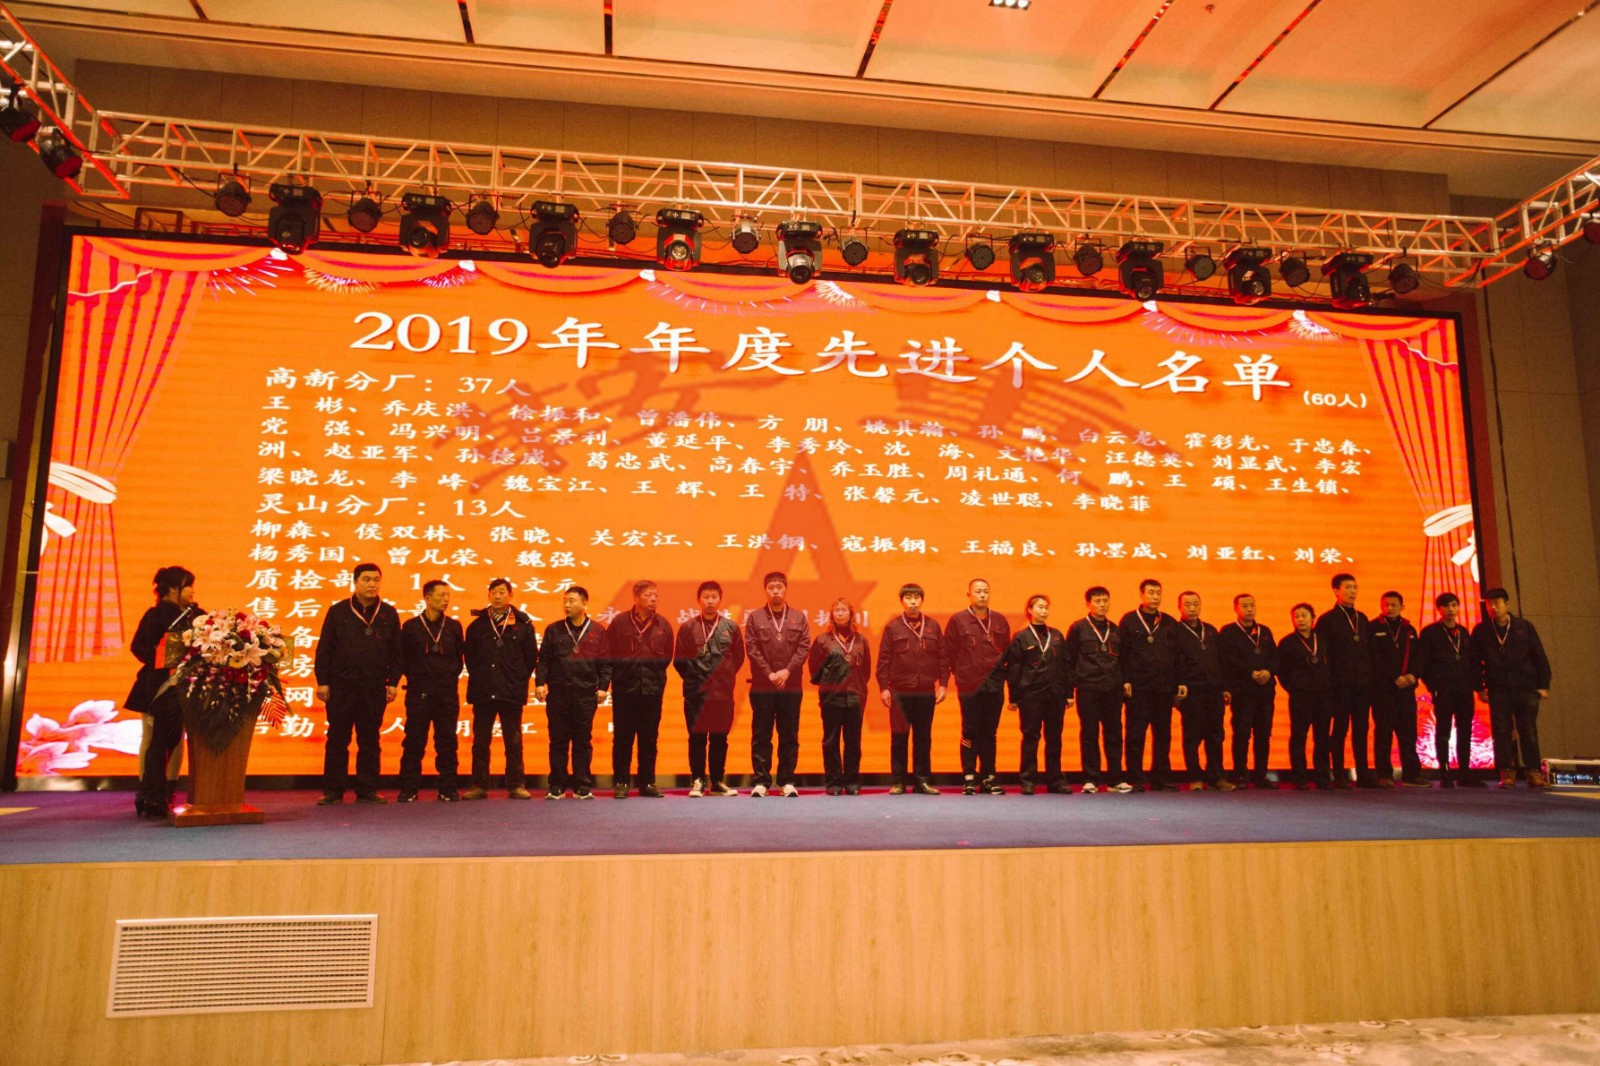 Anshan Heavy Duty Mining hosted the 2020 Annual Meeting